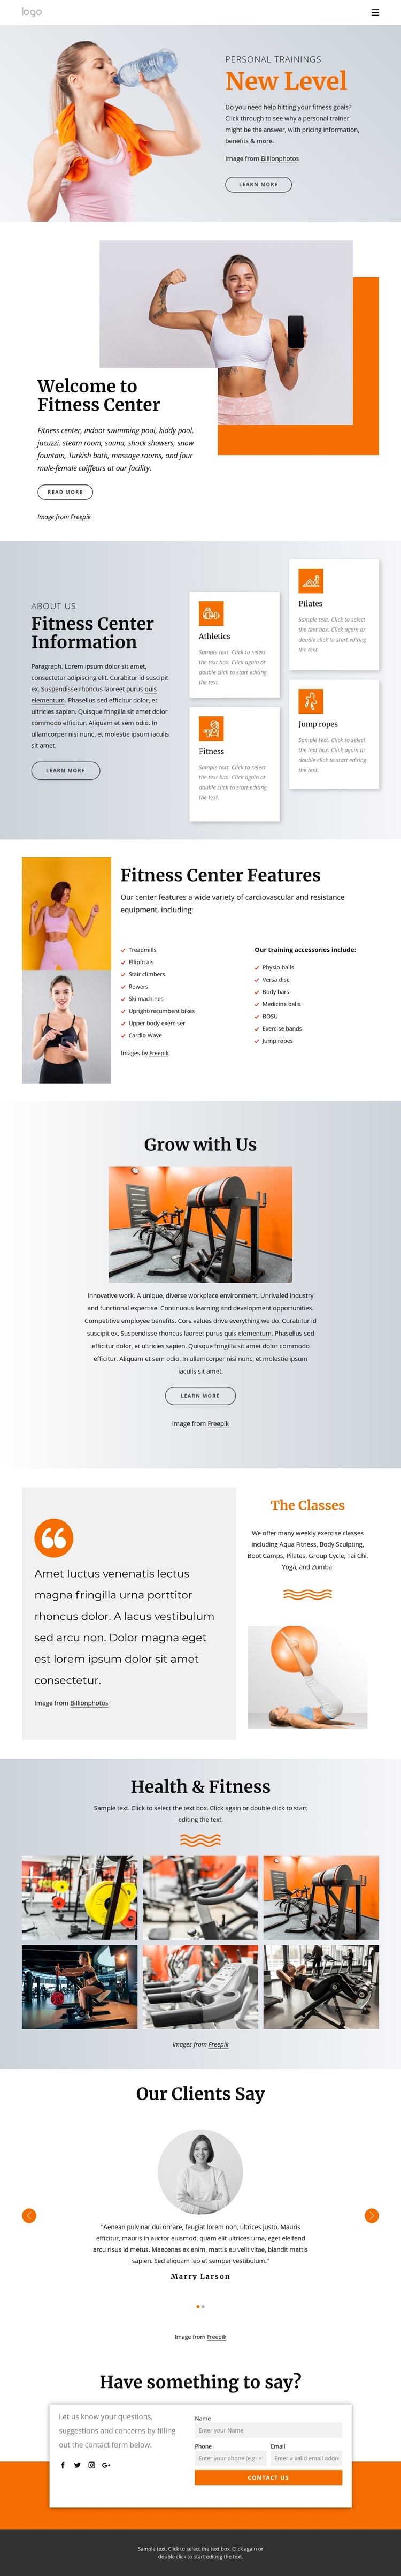 24 hour fitness center One Page Template